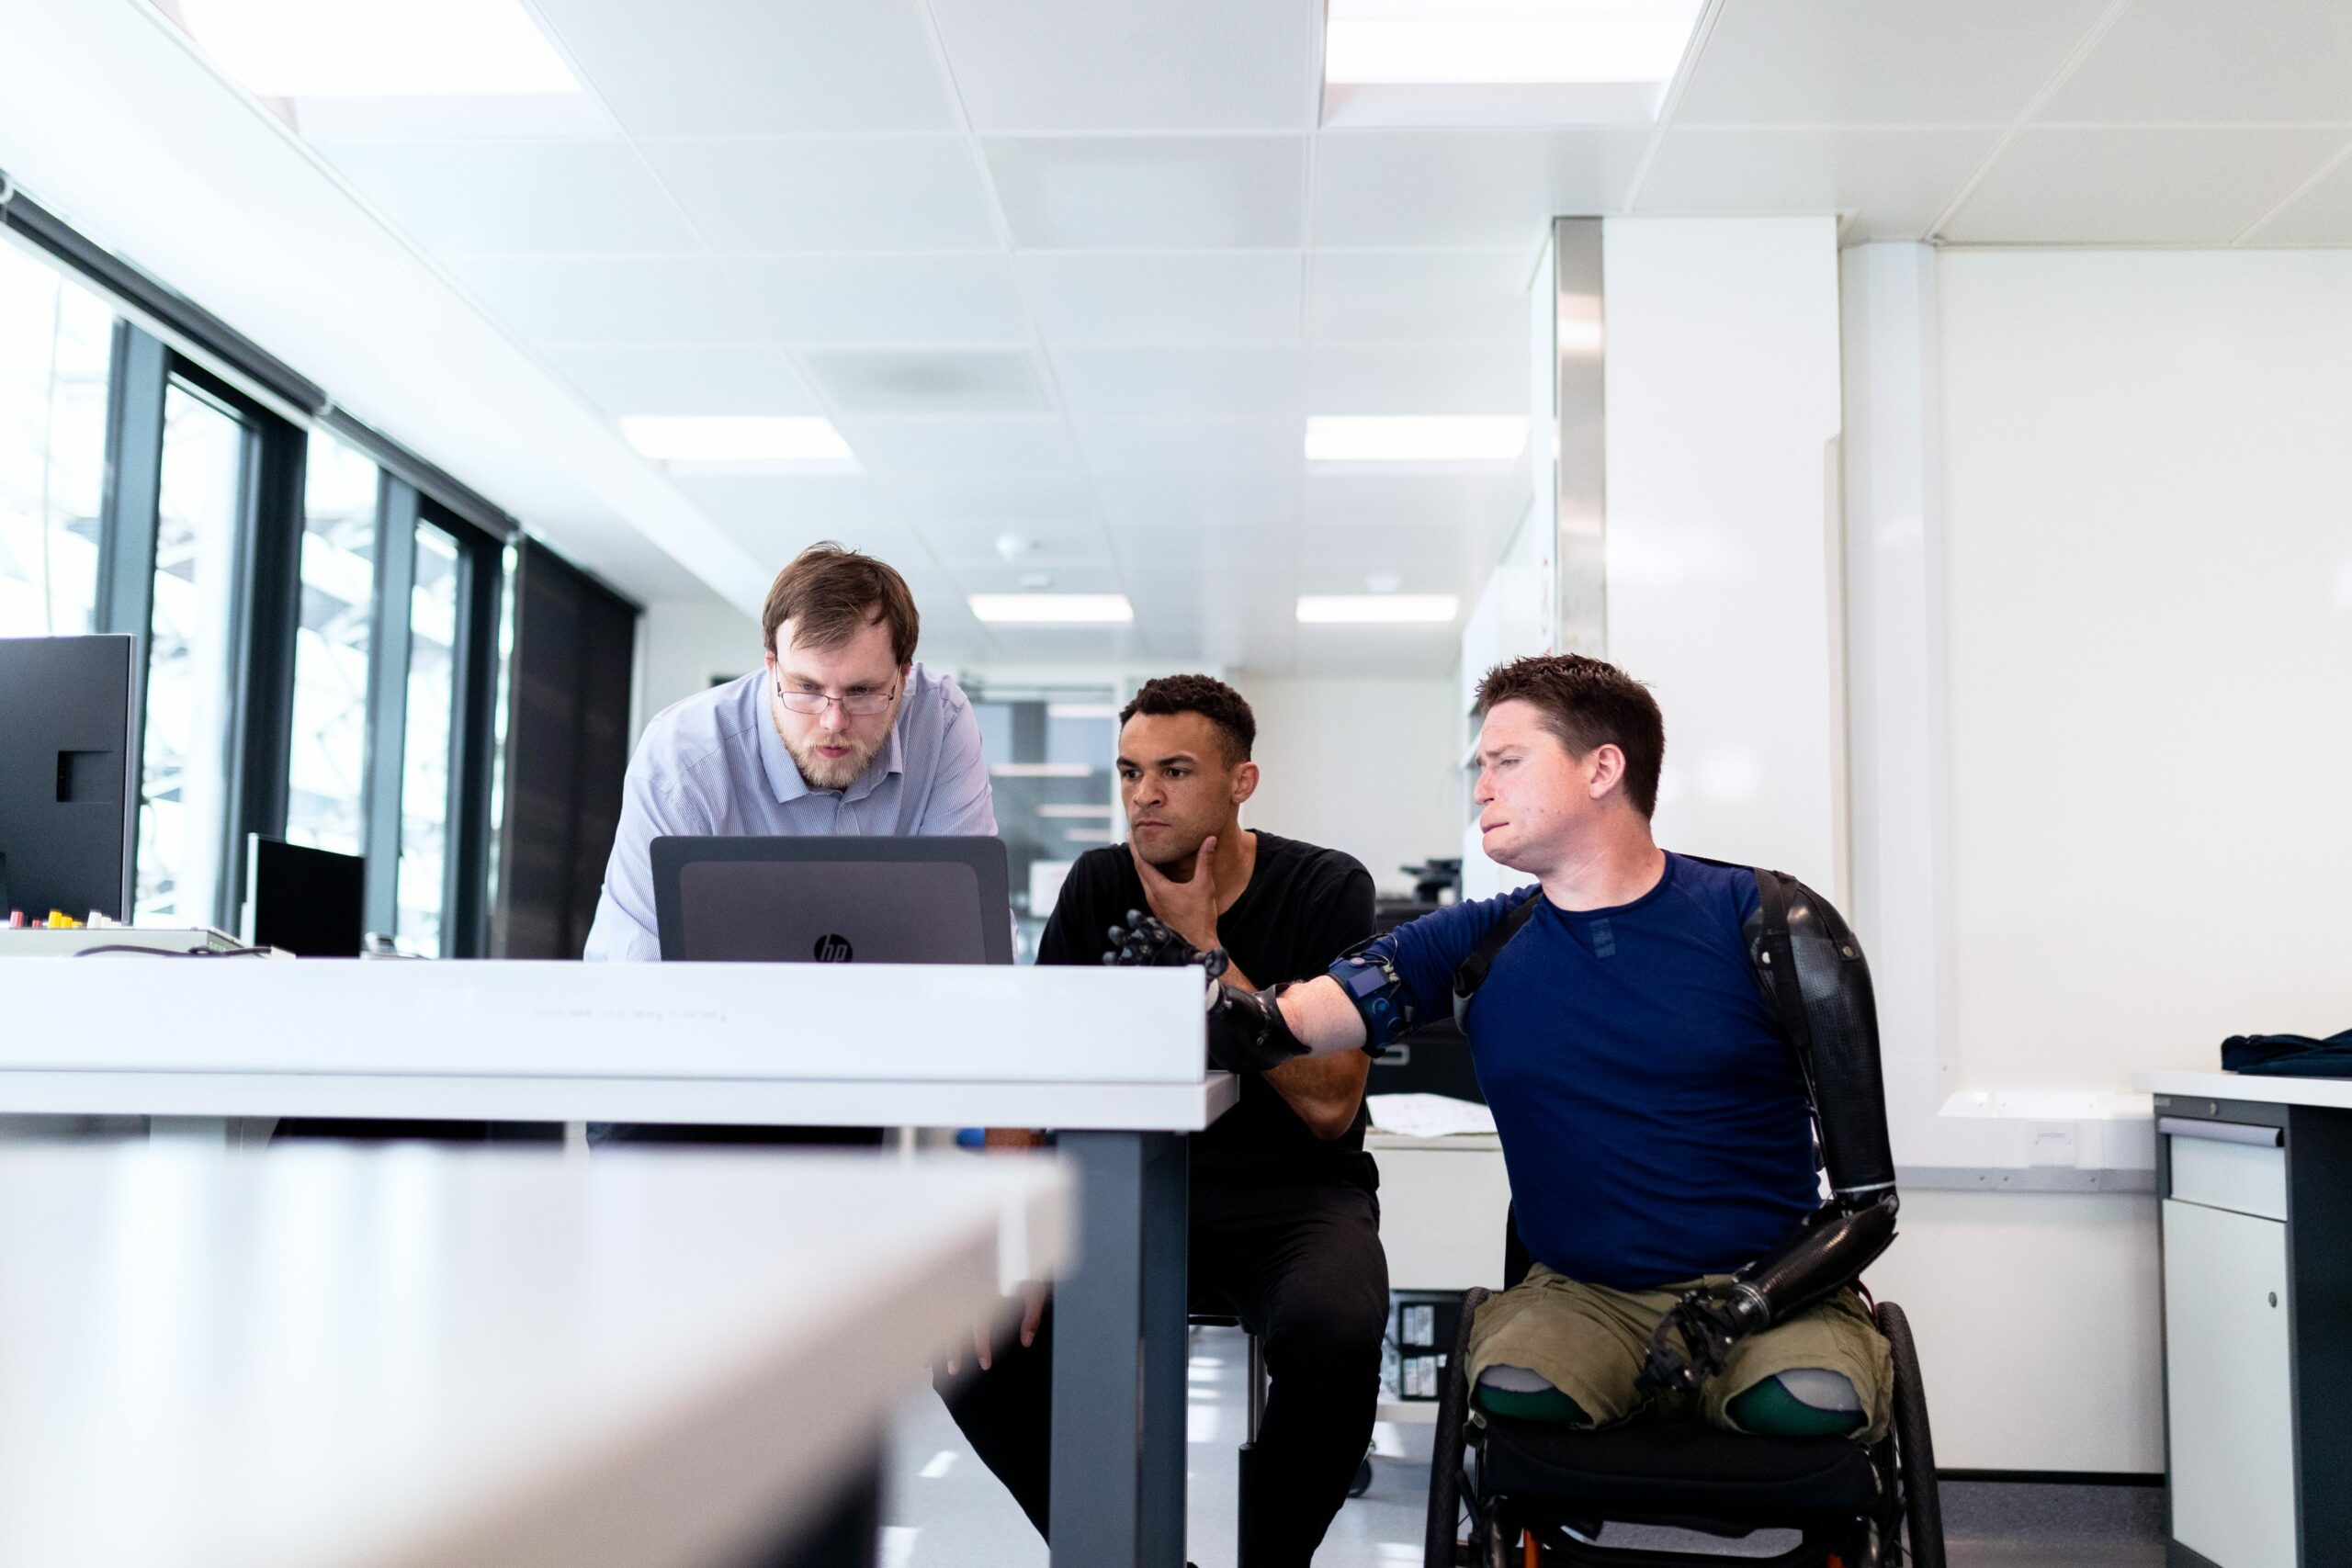 Three men sit around a desk looking at a computer screen. One of the men is in a wheelchair and is paraplegic.